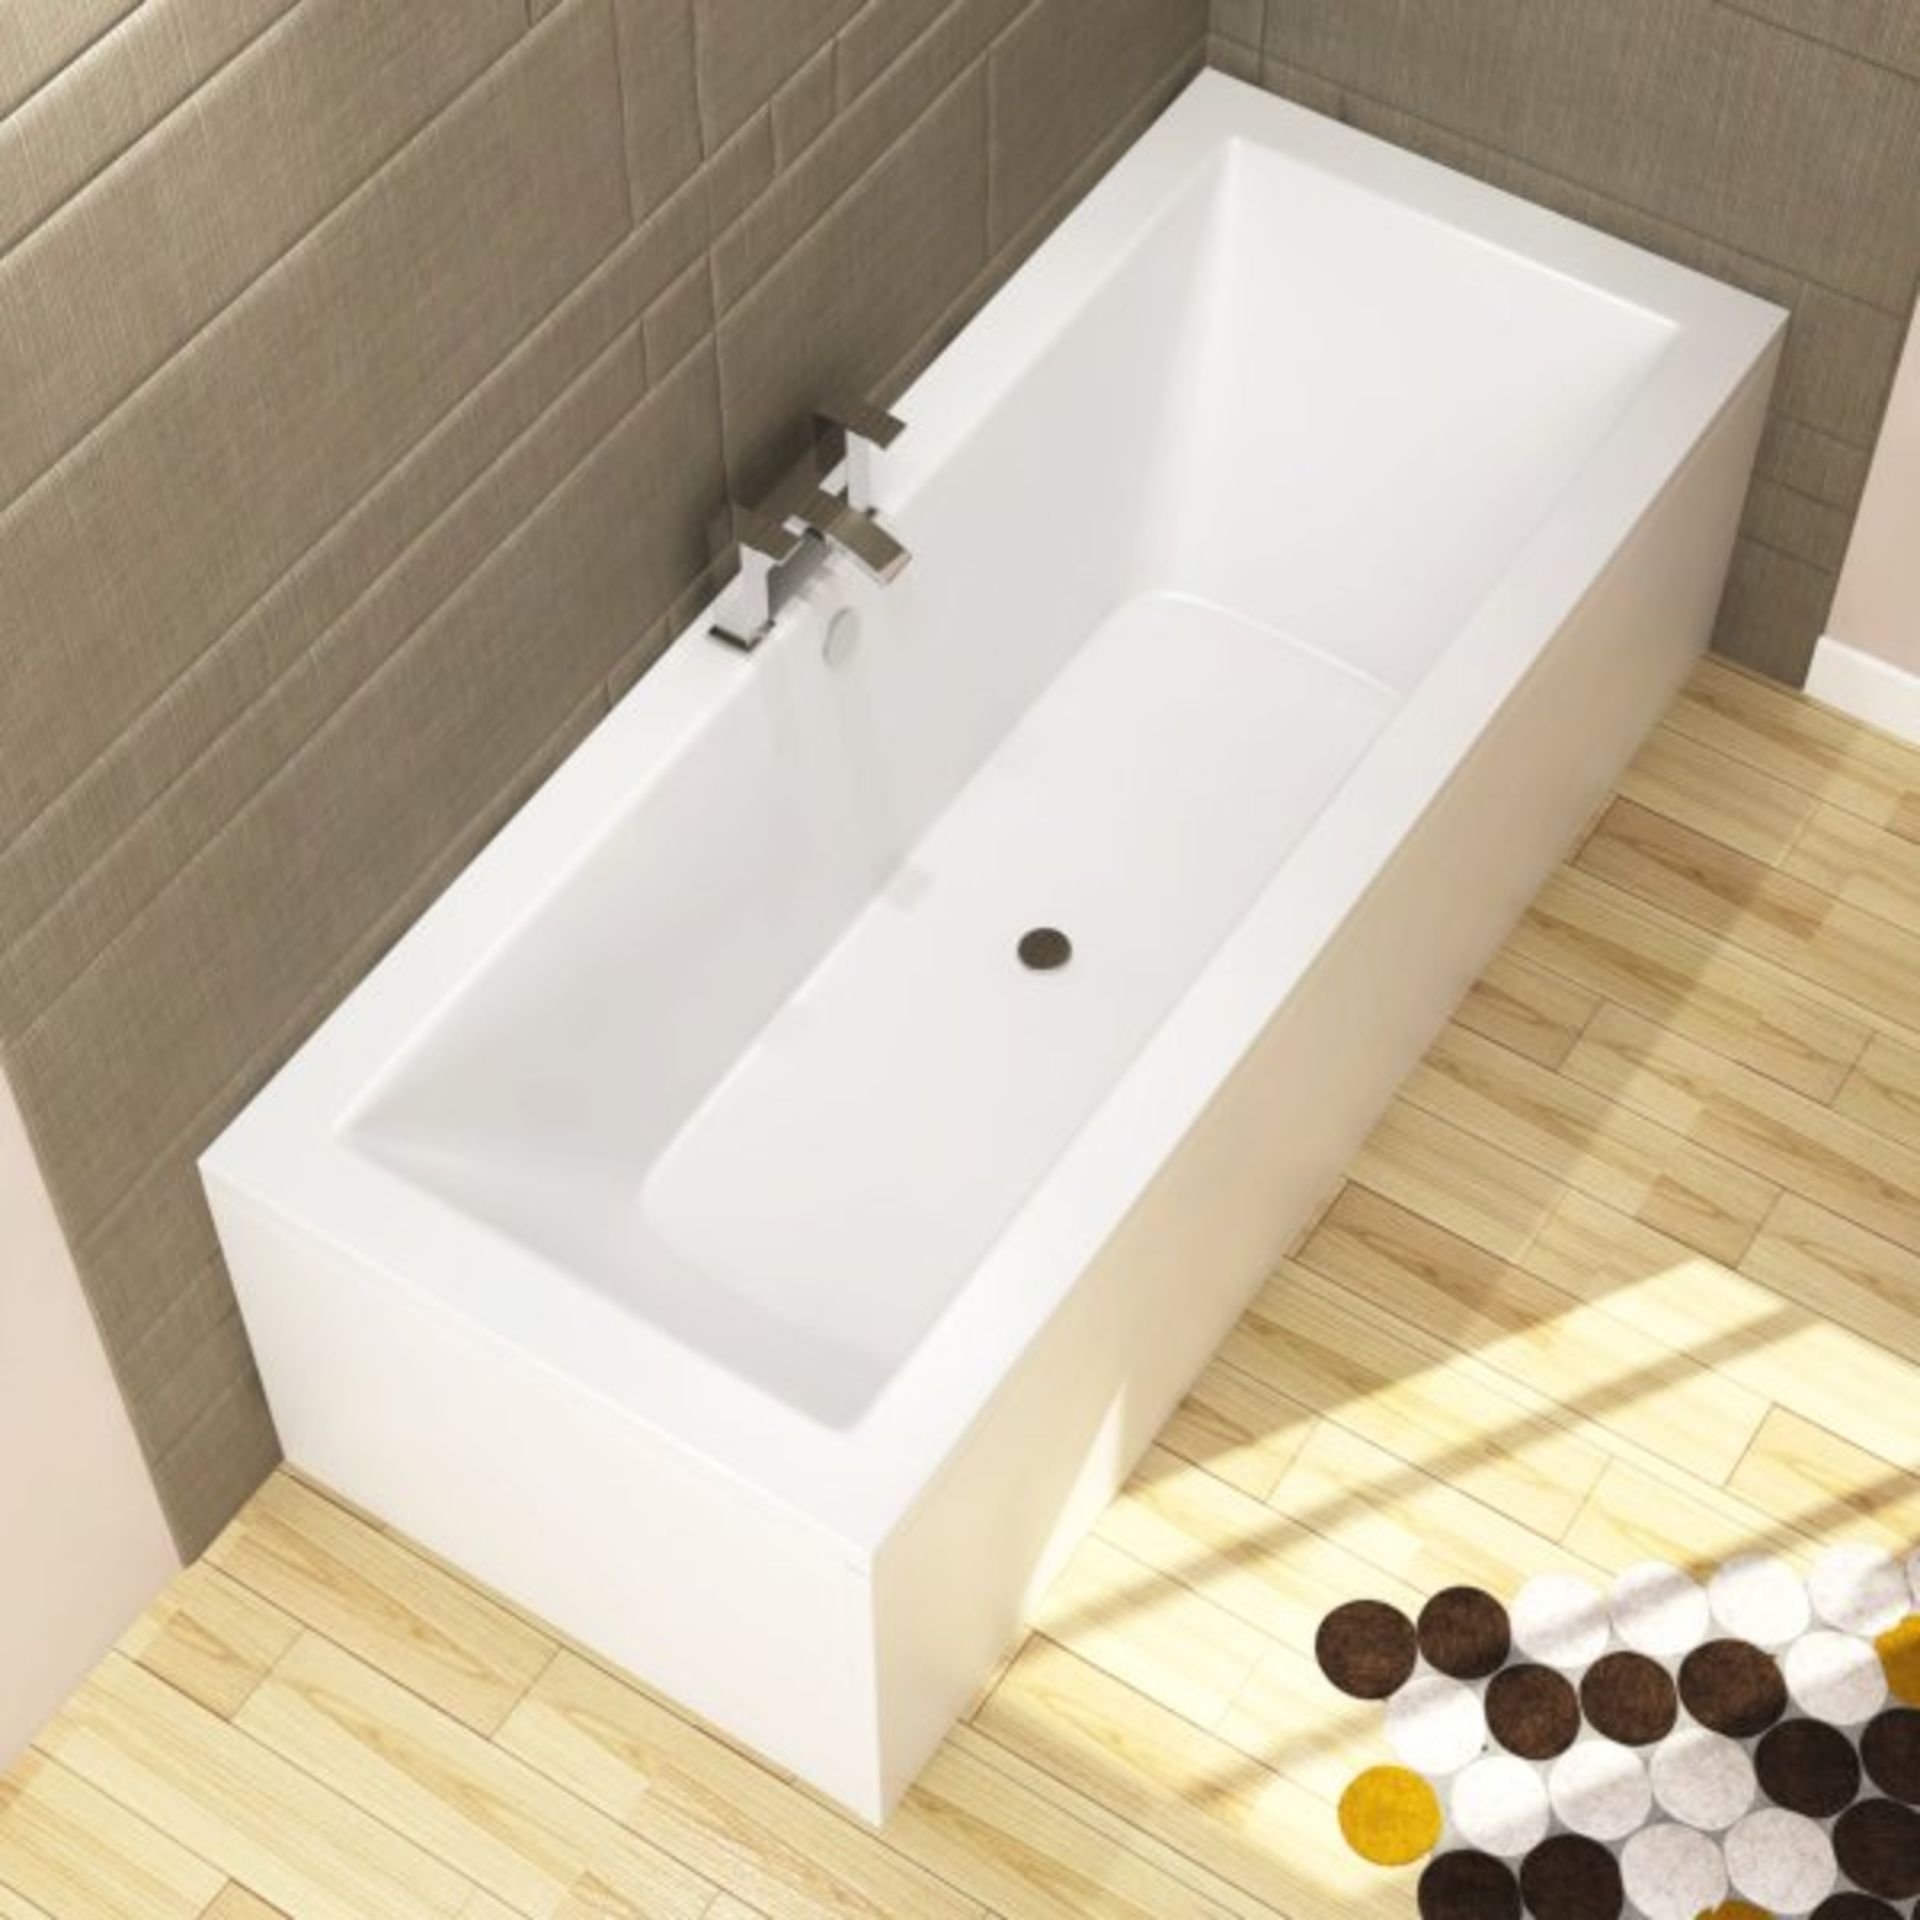 New (L1) 1700x700mm Square Double Ended Bath. RRP £449.99. This Double ended Bath is Perfect f...